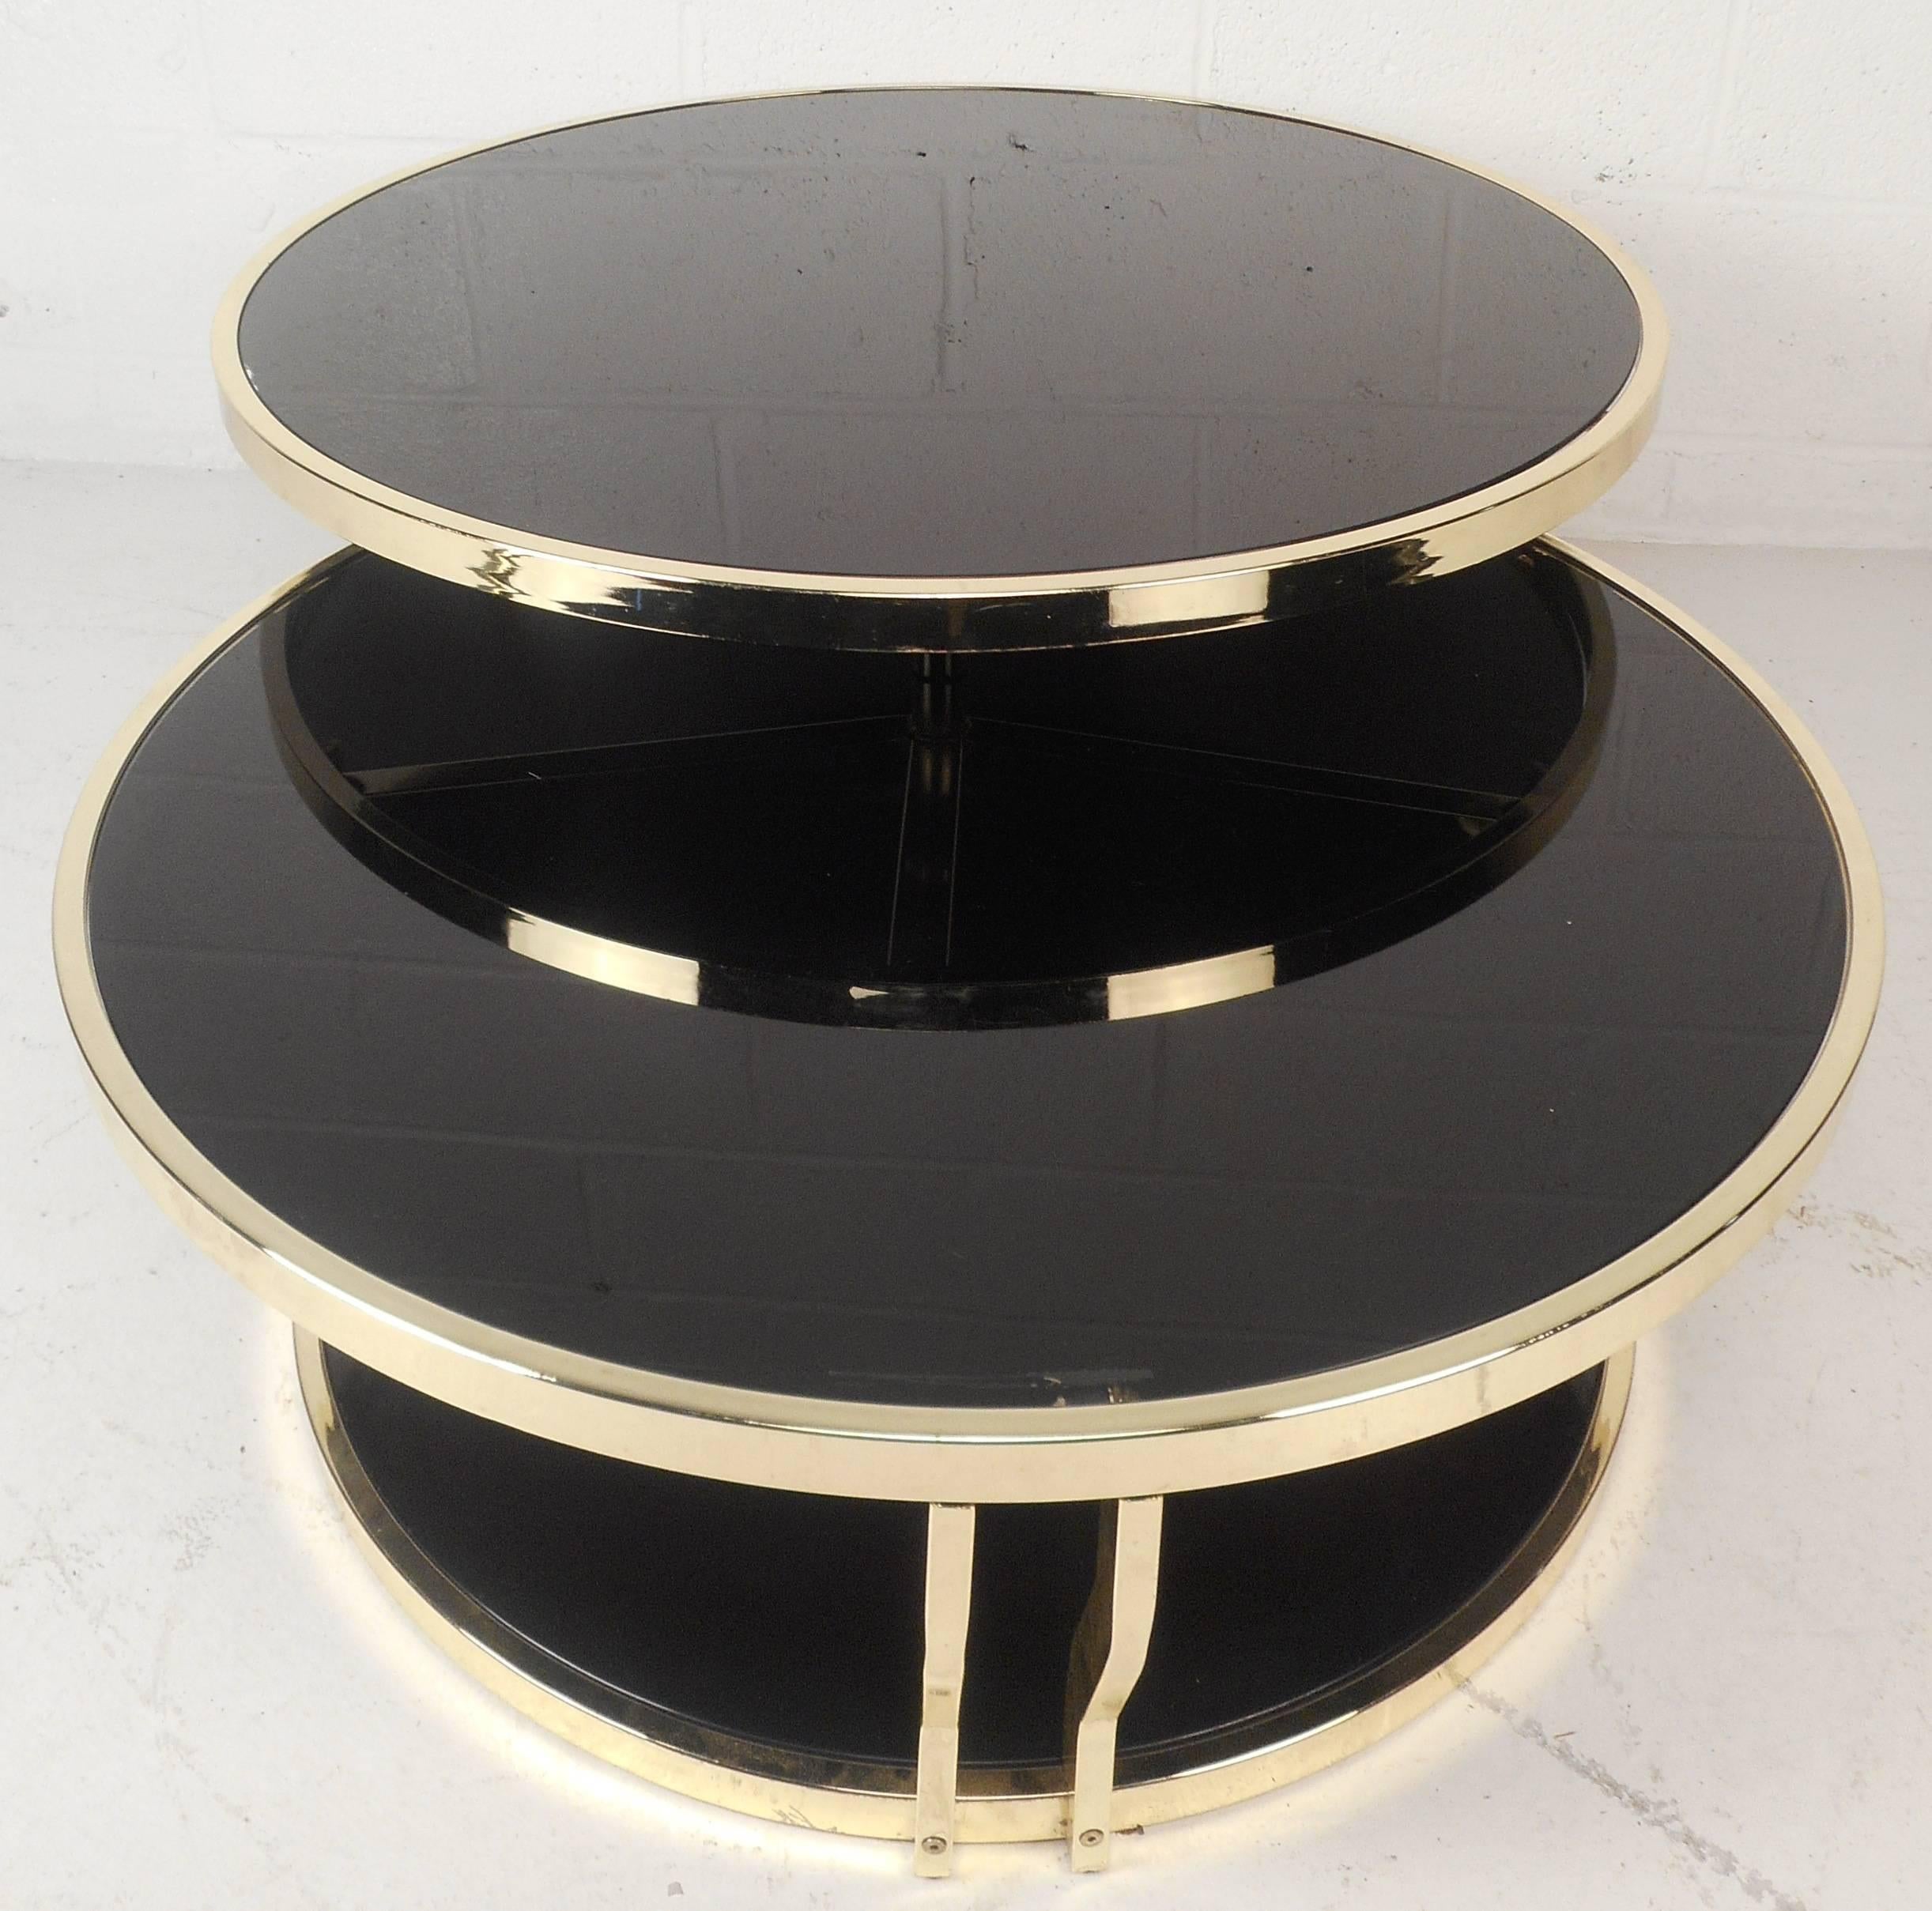 This beautiful vintage modern Italian coffee table offers the ability to swivel the top tier for extra space and convenience. Versatile three tier design with a brass frame and dark smoked glass table tops. The sculpted sides ensure sturdiness and